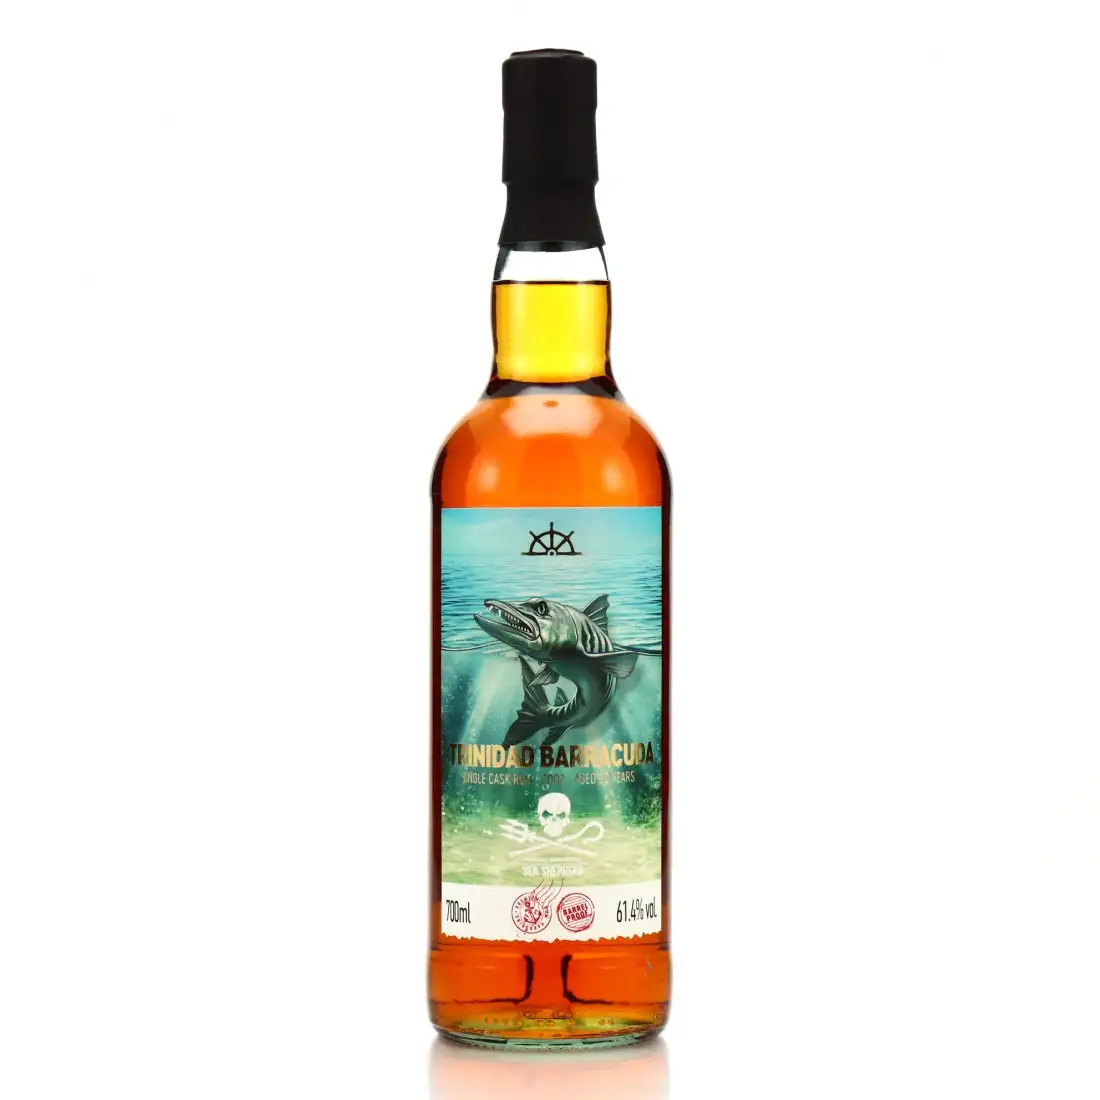 Image of the front of the bottle of the rum Flensburg Rum Company Sea Shepherd (Barracuda Single Cask)